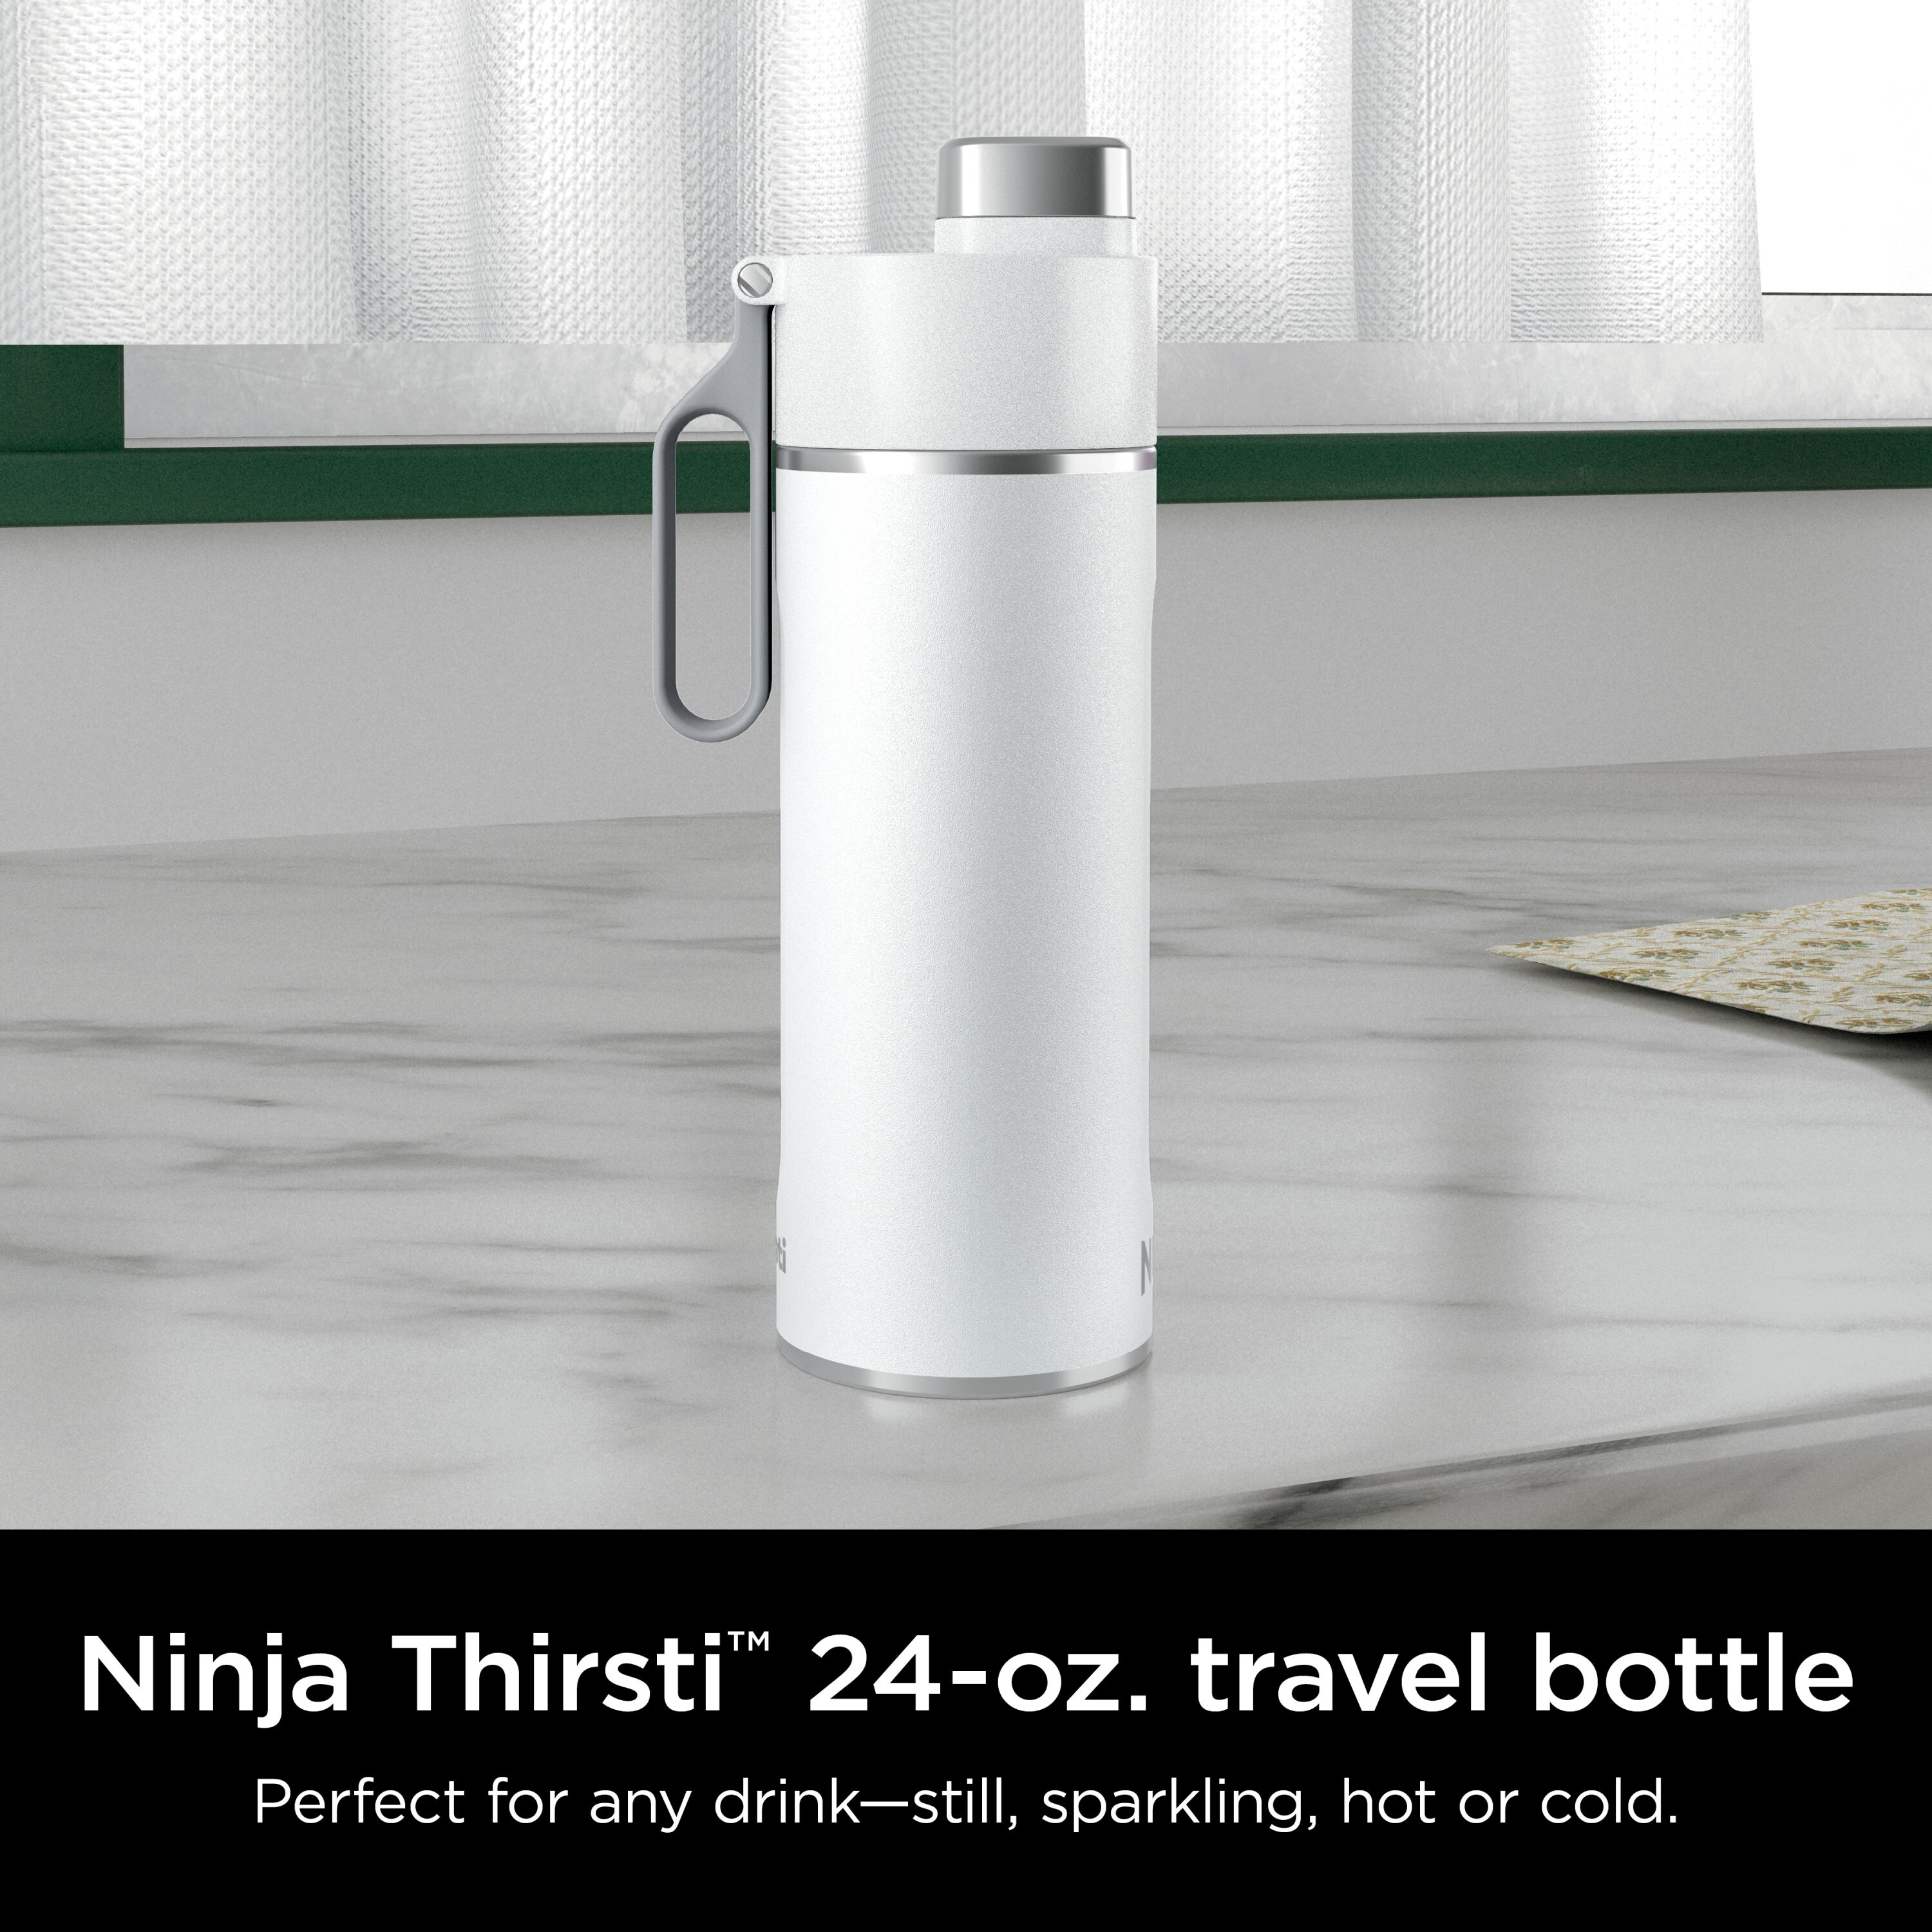 Ninja DW2401MT Thirsti 24oz Travel Water Bottle, For Carbonated Sparkling  Drinks, Colder and Fizzier Longer, Stainless Steel, Leak Proof, Hot for